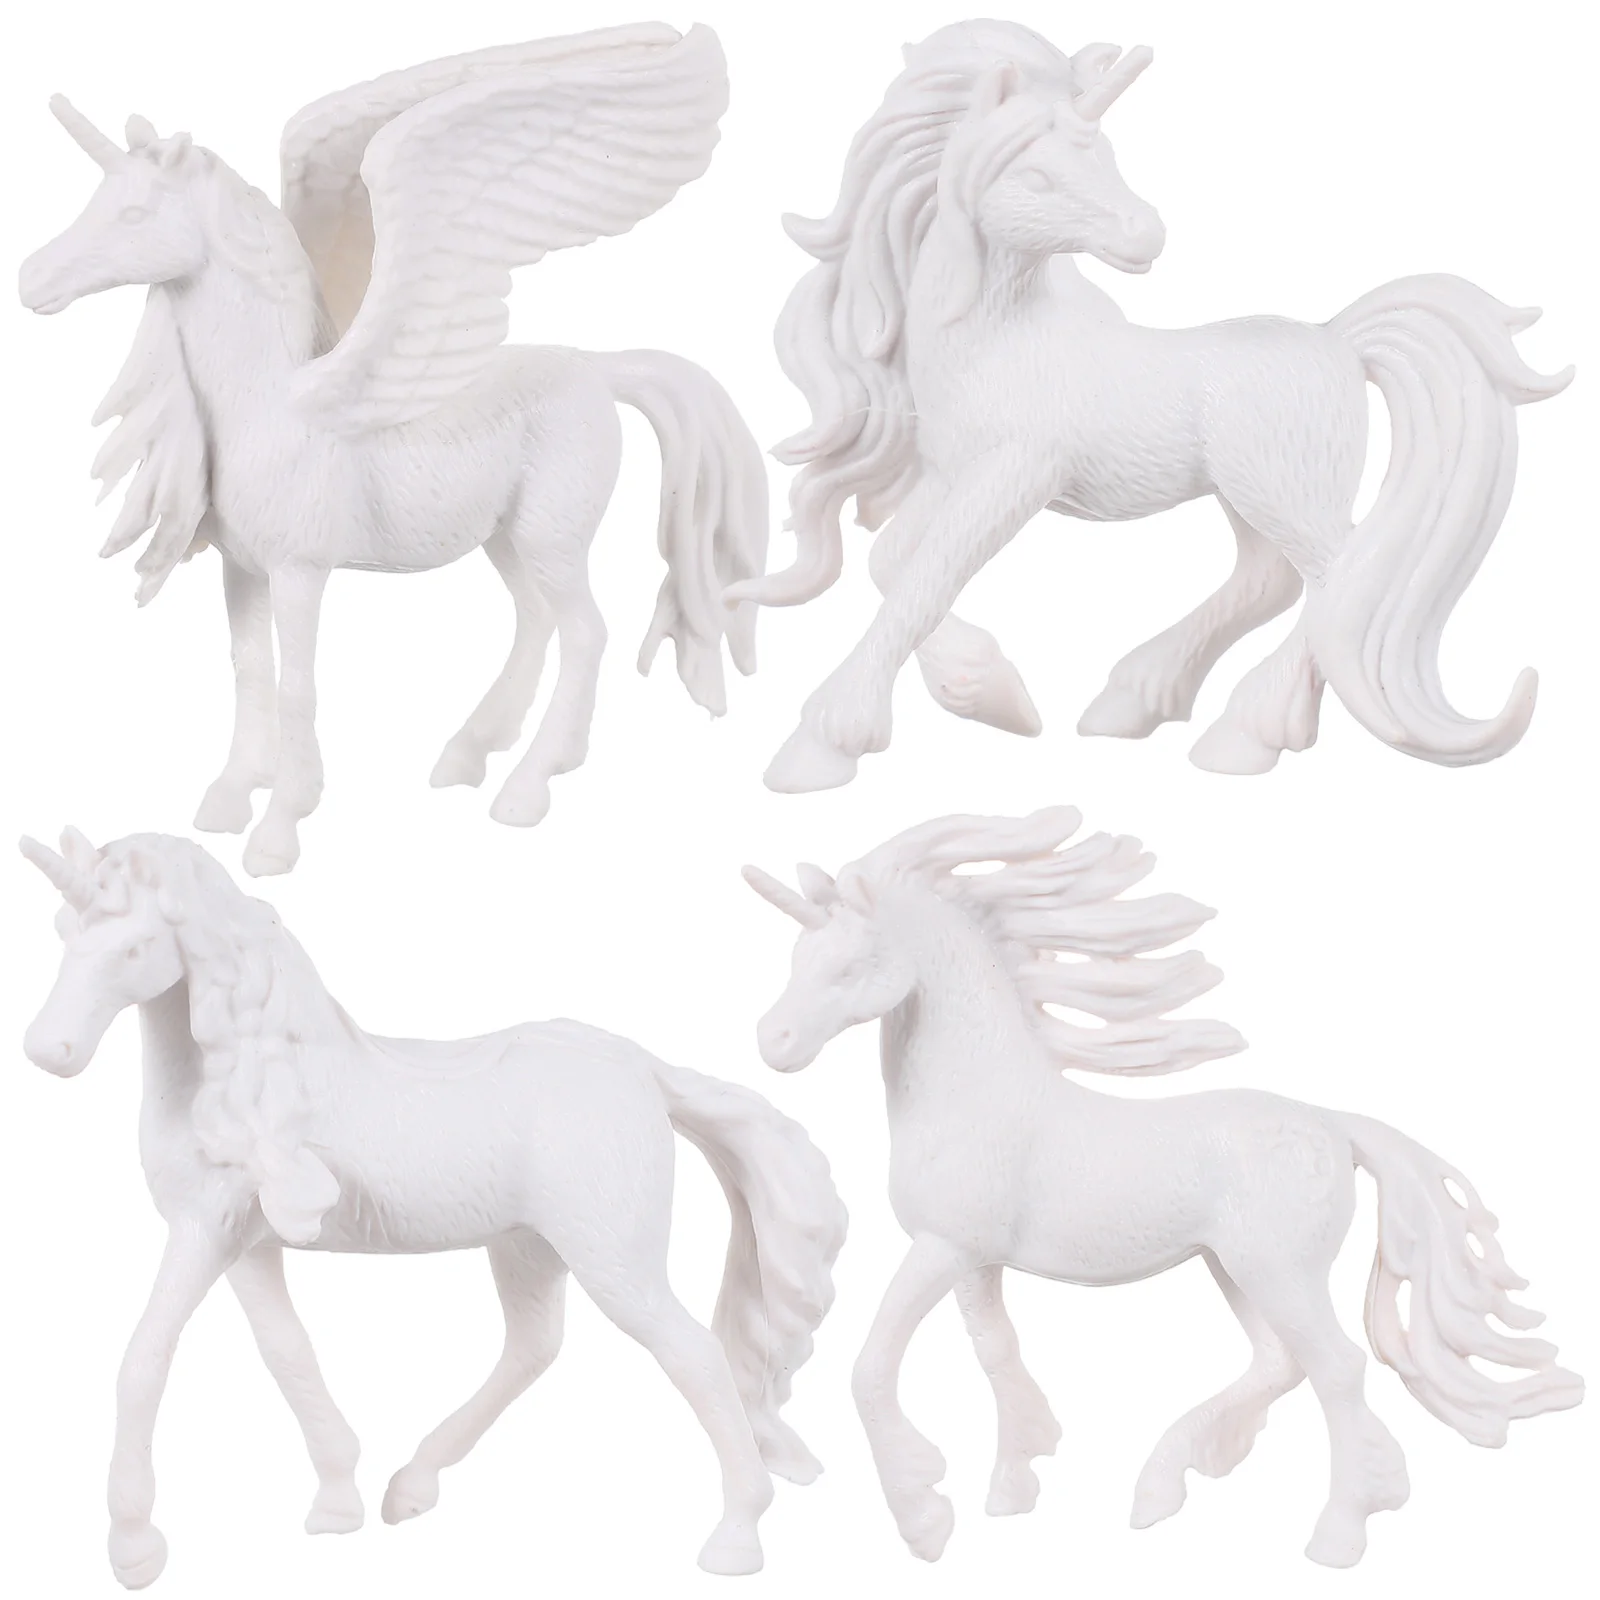 https://ae01.alicdn.com/kf/Sf125c7e145b849dcb57208085896c1b3g/Unicorn-Painting-Kit-Kids-Diy-Paint-S-Arts-Craft-Crafts-And-Supplies-Party-Set-Own-Yourart.jpg